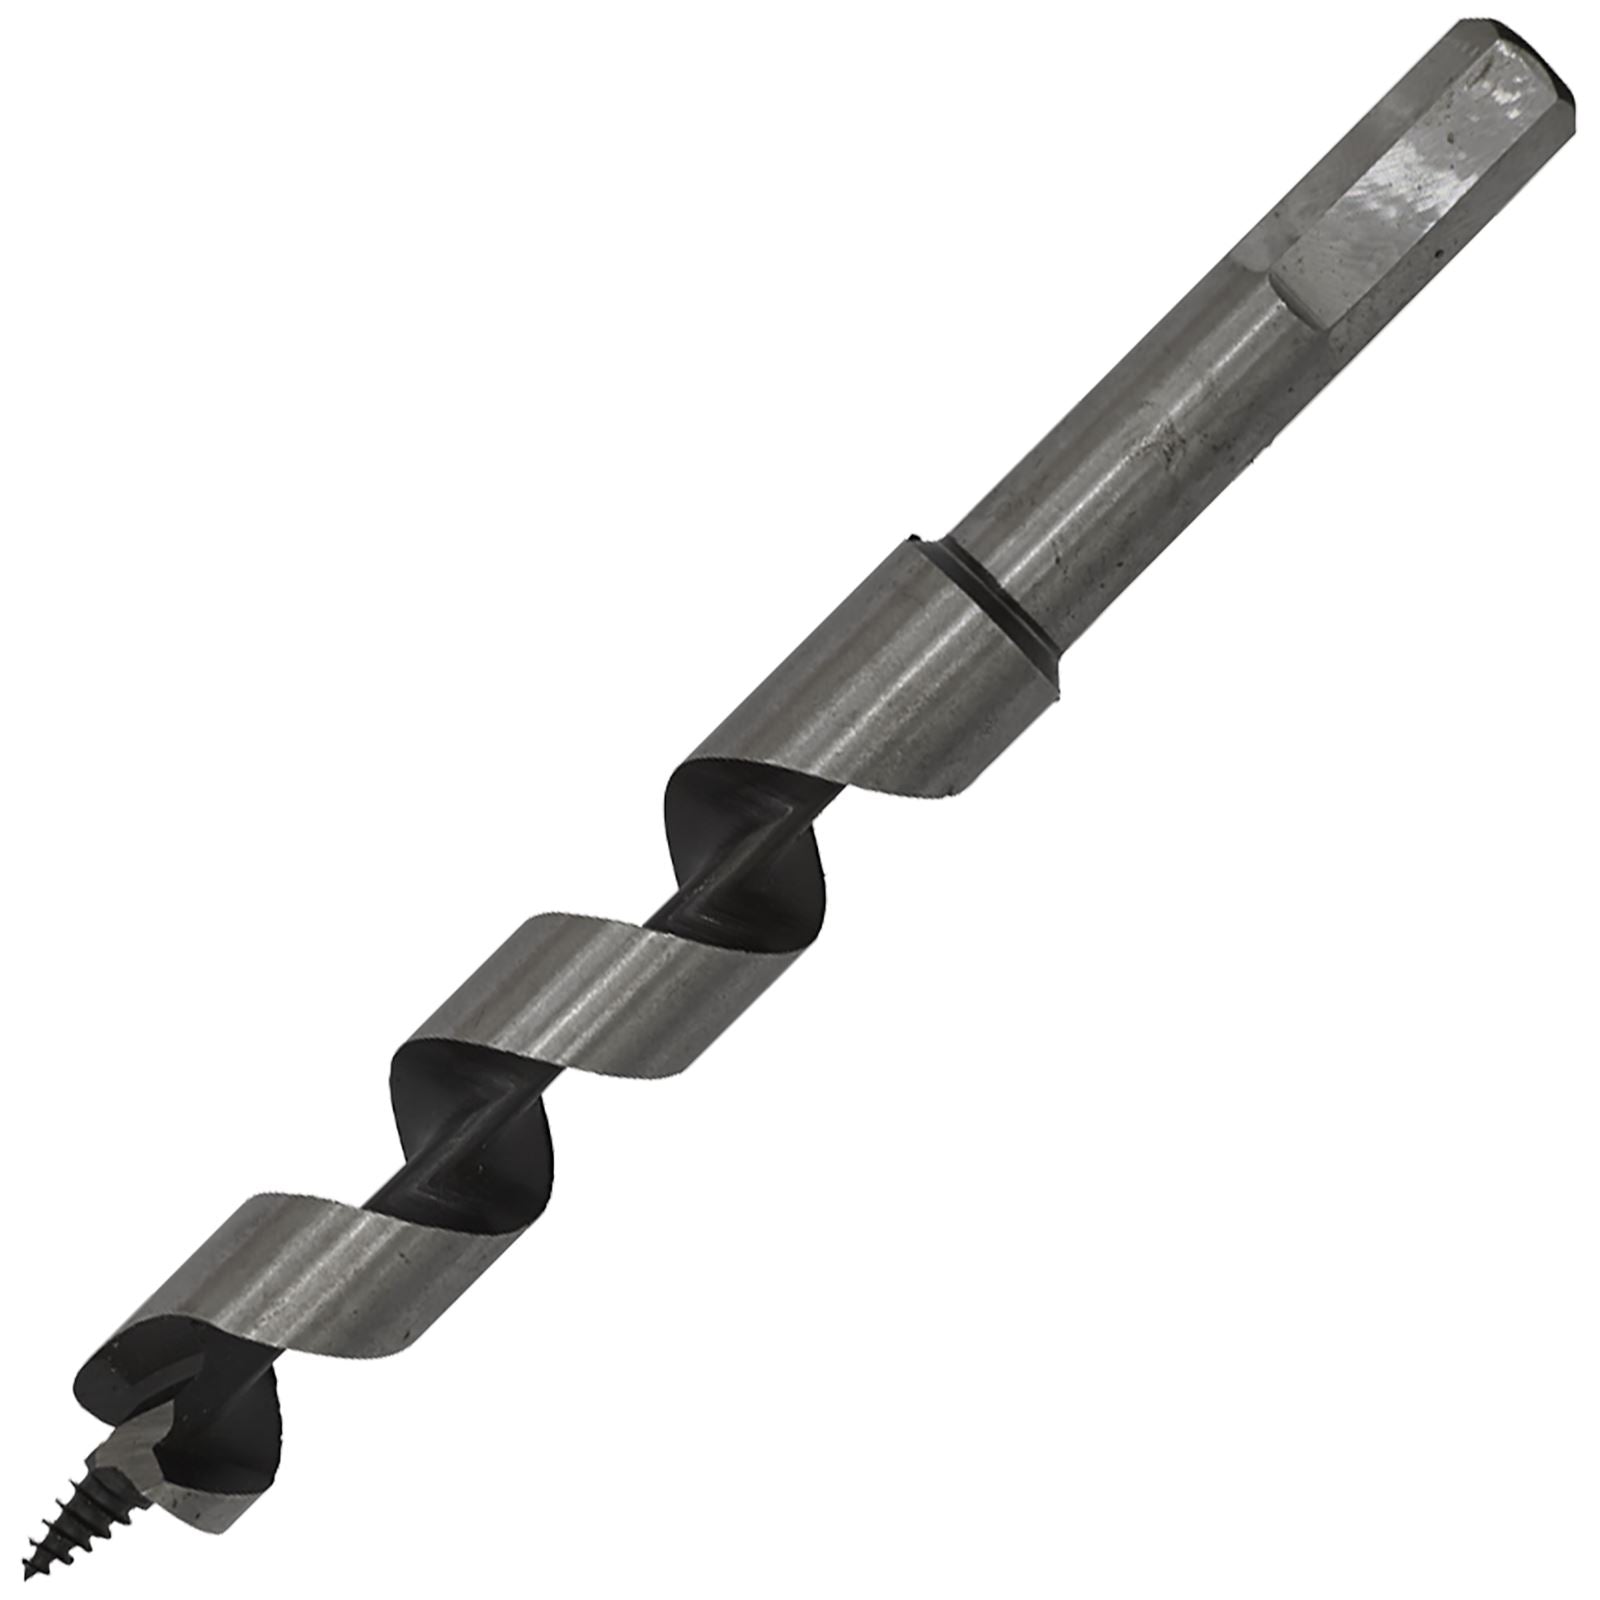 Worksafe by Sealey Auger Wood Drill Bit 16mm x 155mm